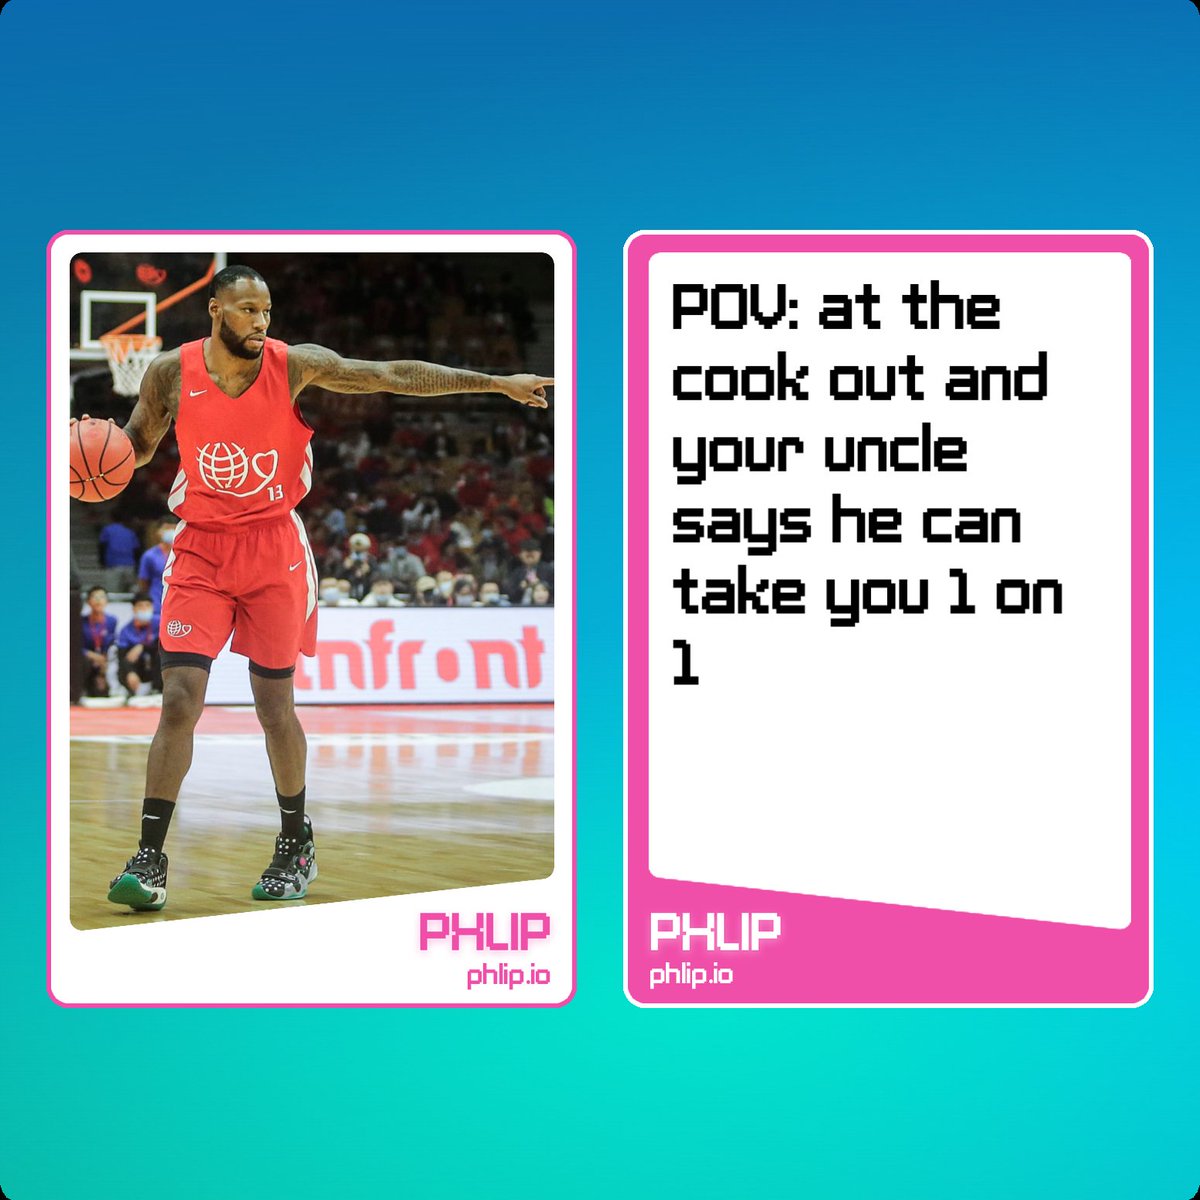 Unc always talking crazy at the cook out. Watch @SonnyWeems13 cook em' this evening at 7pm est. 
$PHLIP #TBT2022 #TBTtournament